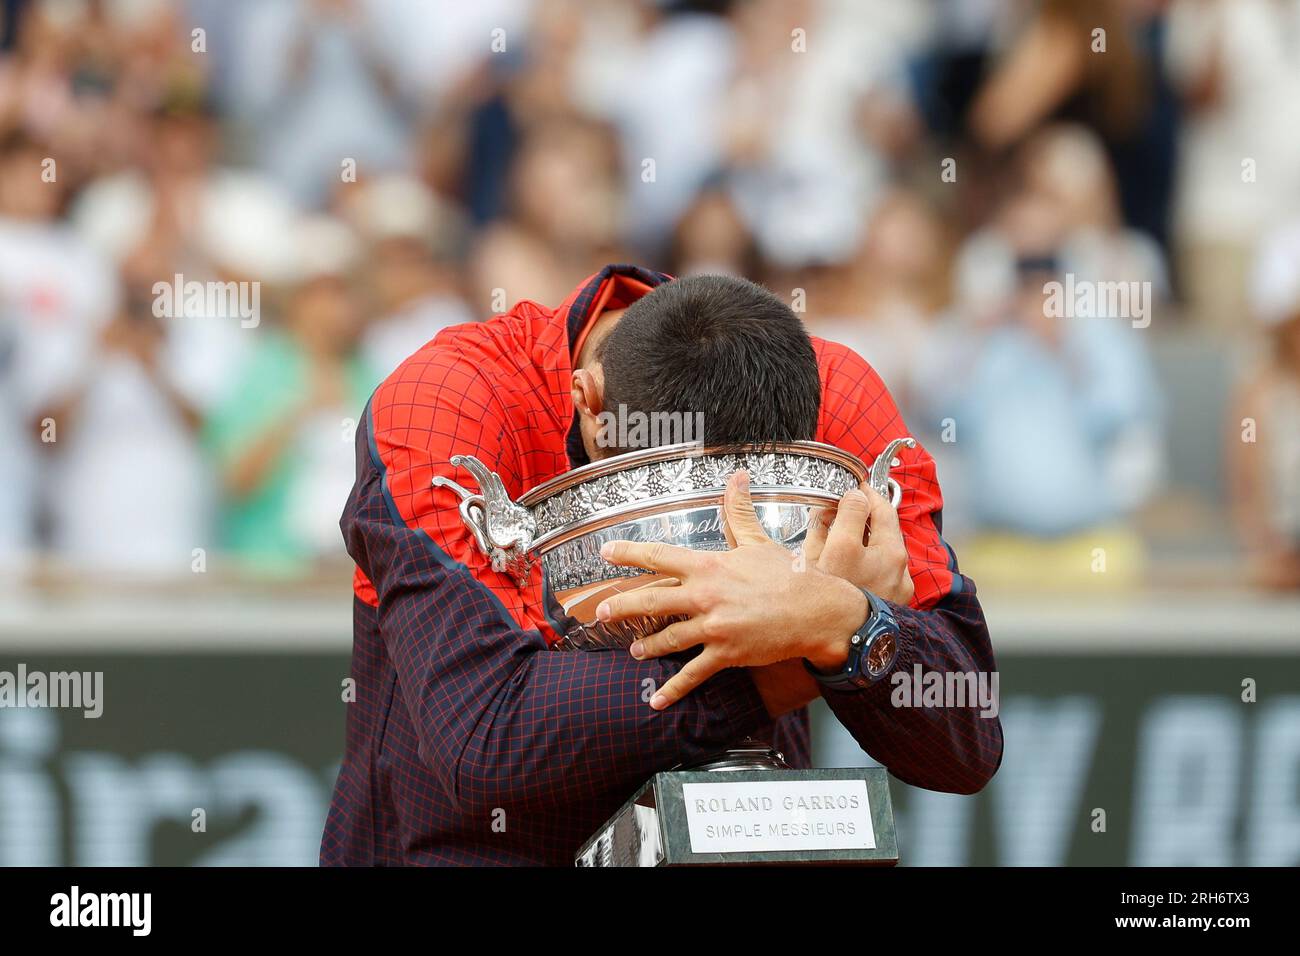 Serbian tennis player Novak Djokovicis putting his head into the championship trophy,he is now the record holder with 23 Grand Slams after winning the Stock Photo